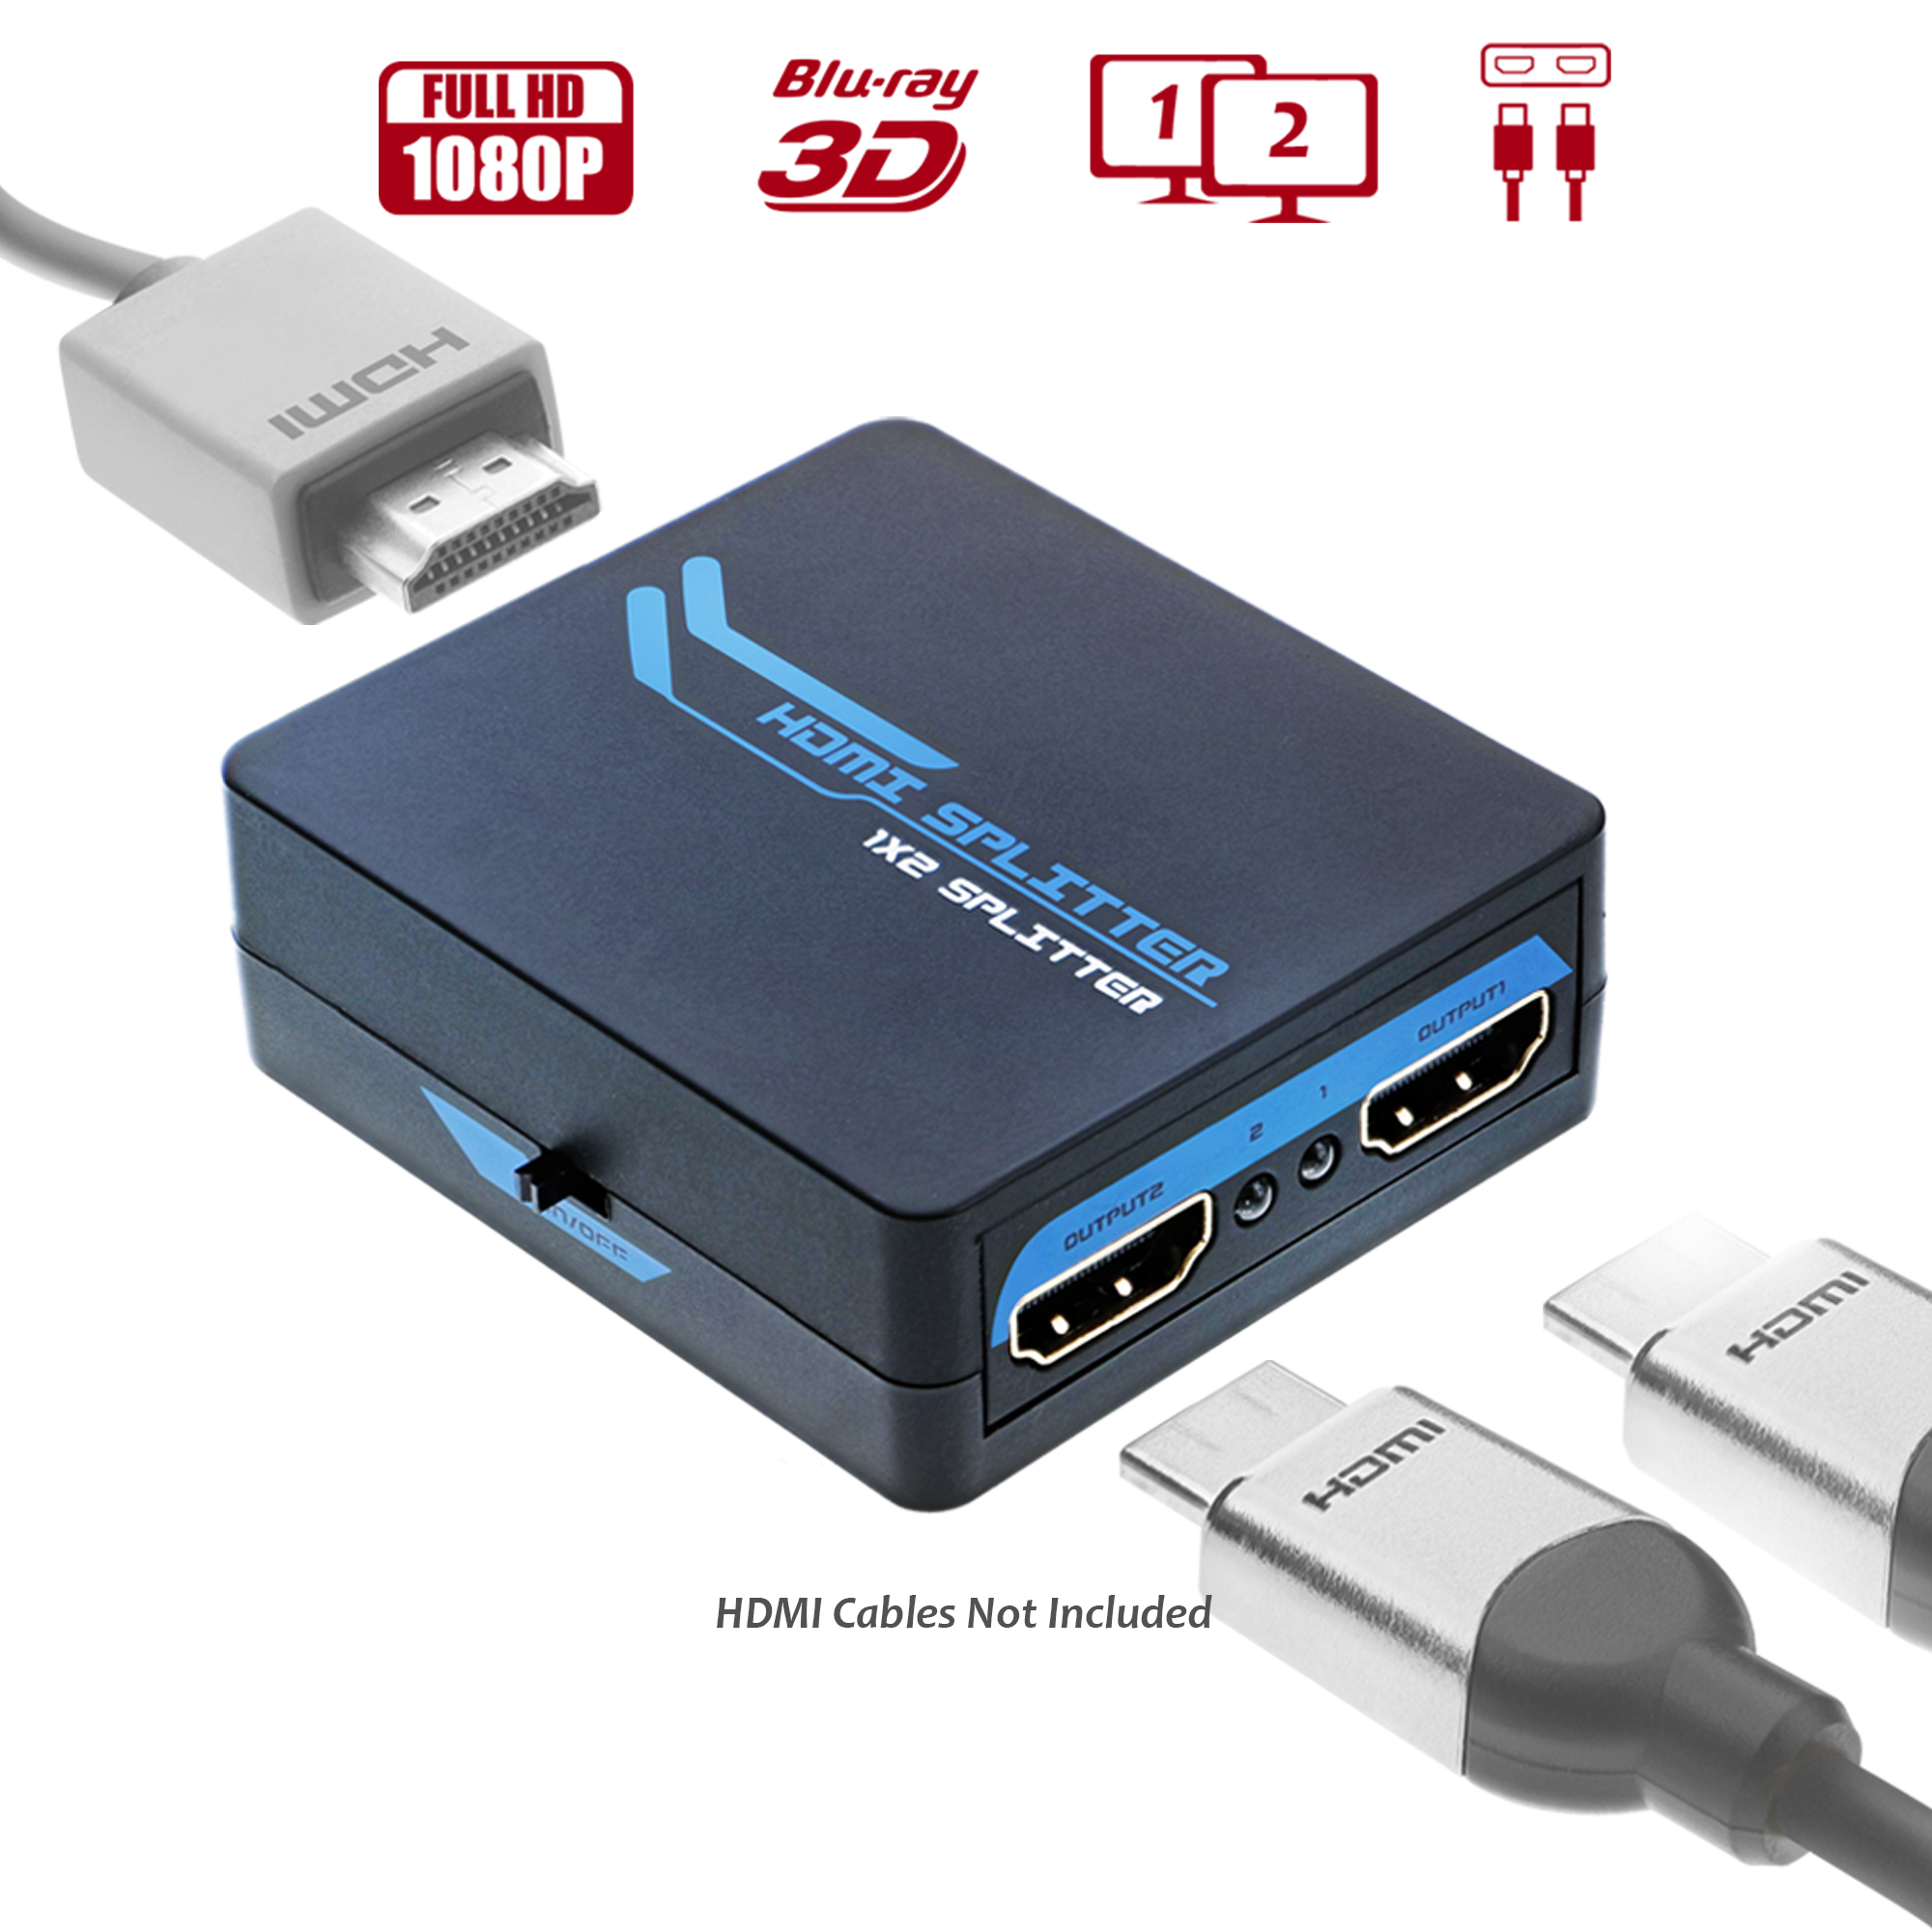 Metra HDMI Splitter and Extender Kit Send 1080p video from an HDMI source  to two displays at the same time at Crutchfield